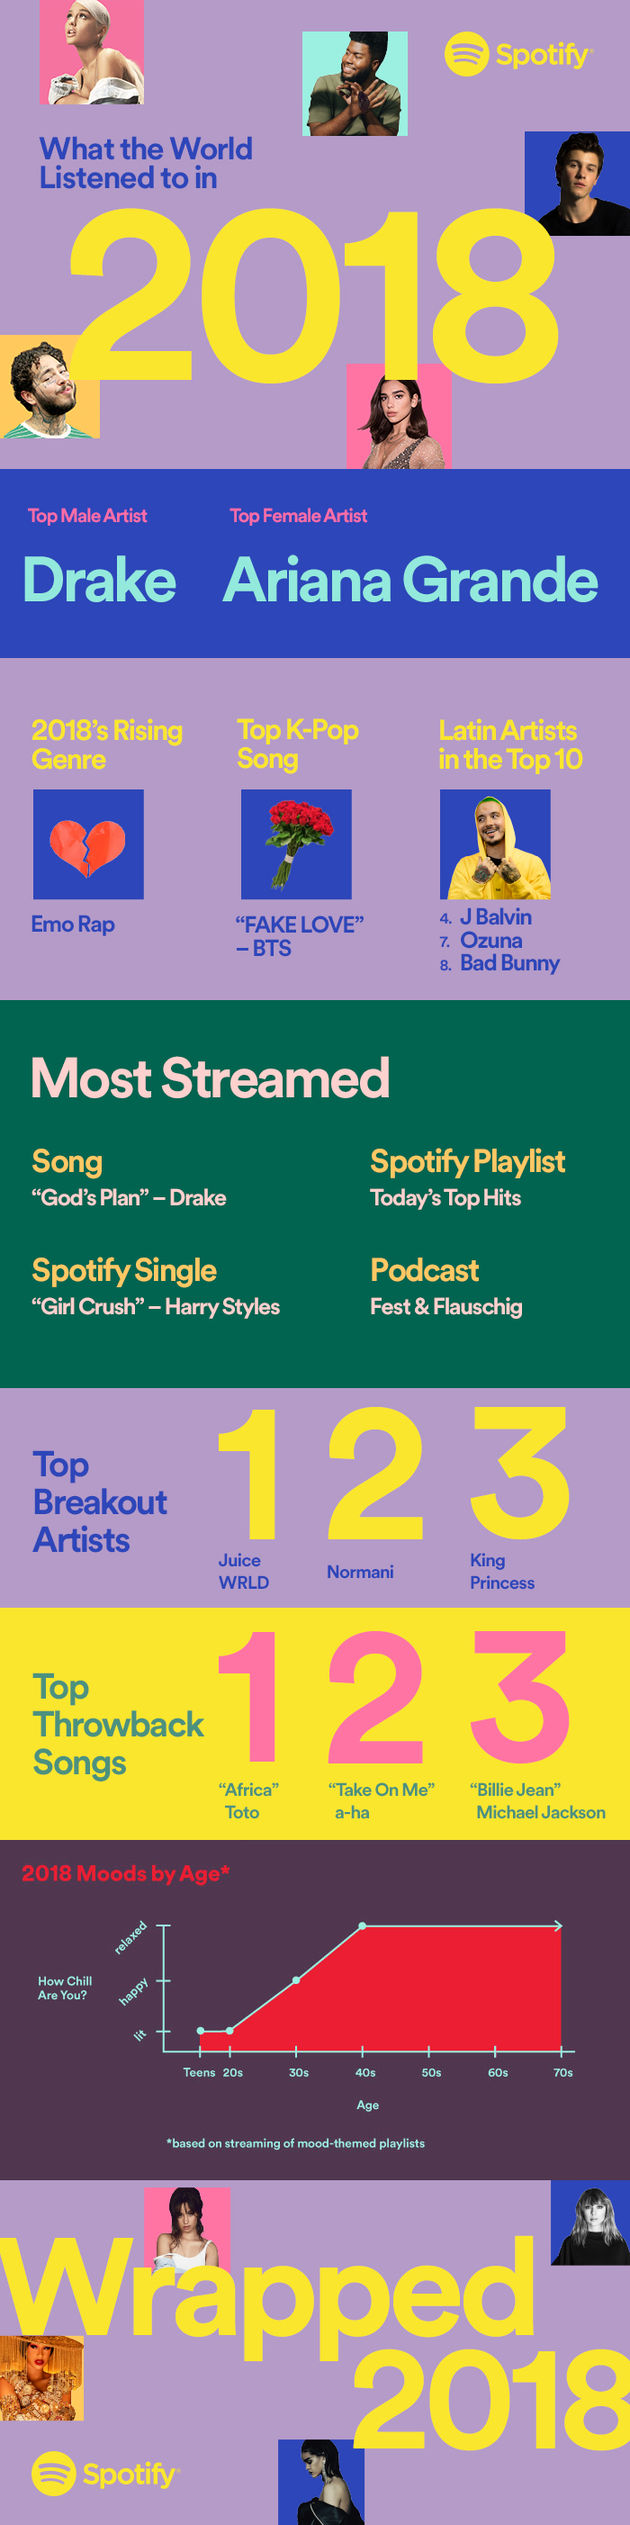 Spotify_Wrapped_Infographic_FINAL